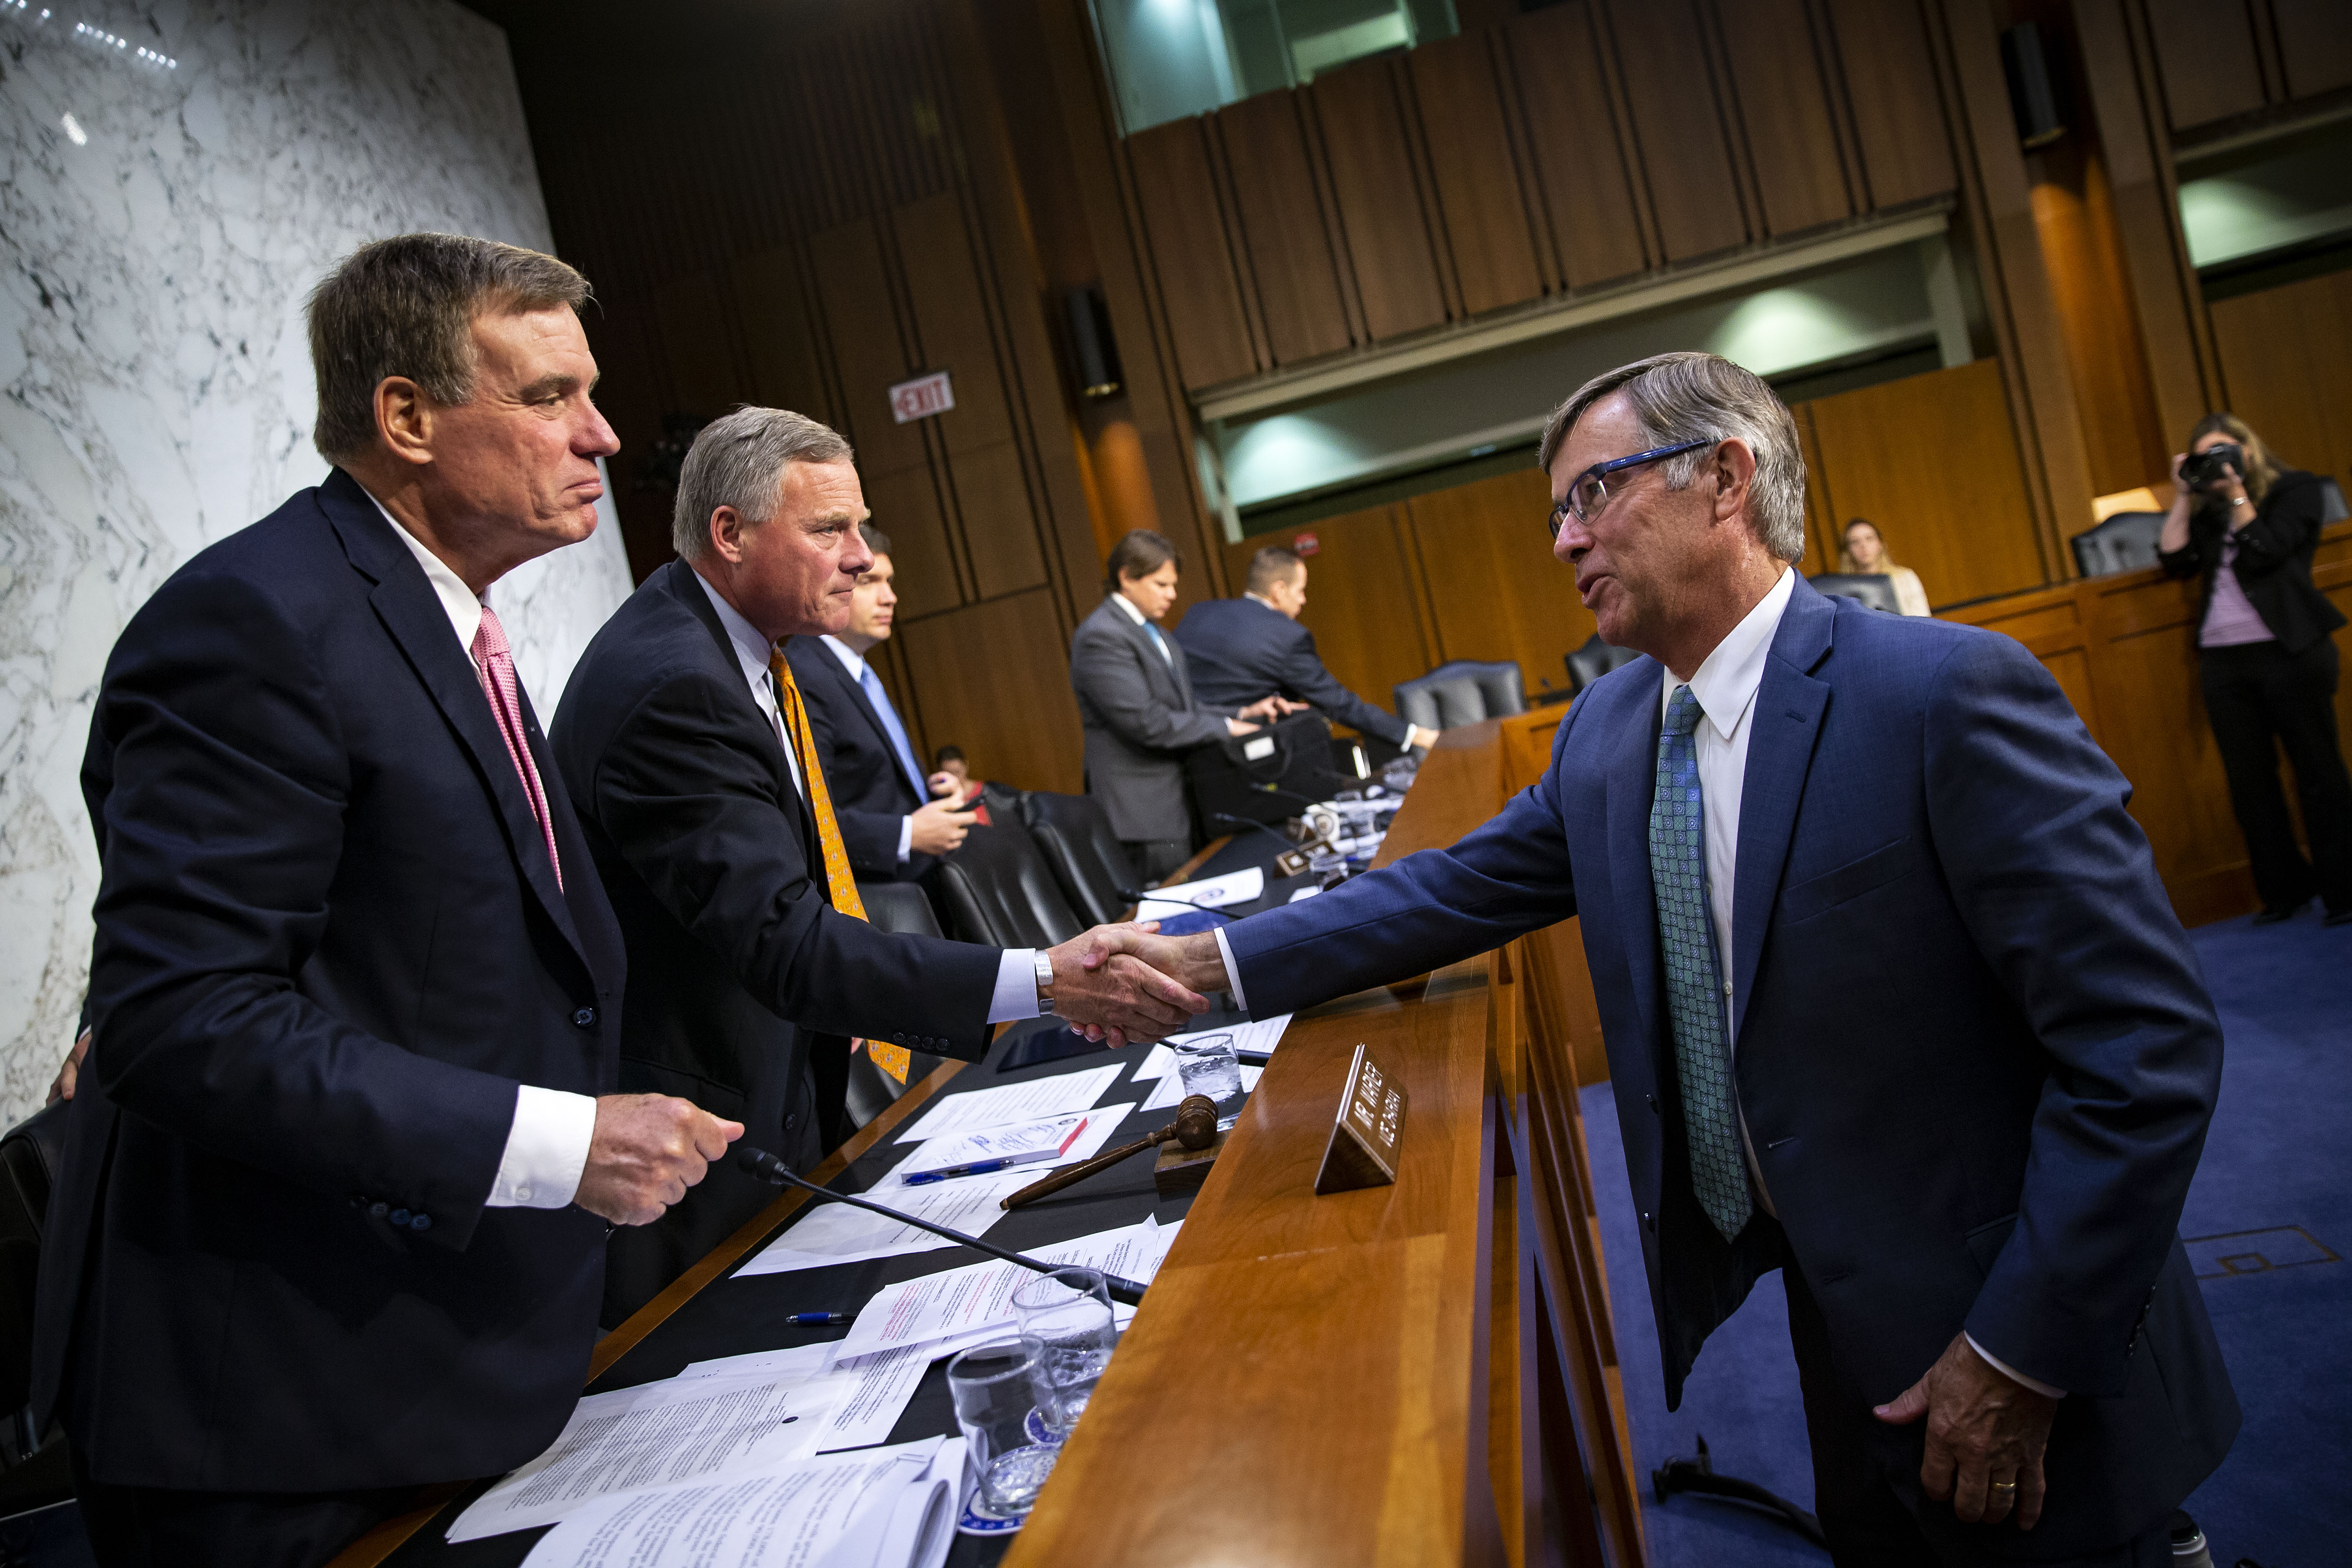 Retired Vice Adm. Joseph Maguire shakes hands with Sen. Richard Burr (R-NC), chairman of the Senate Intelligence Committee, and Sen. Mark Warner (D-VA), vice-chair of the Senate Intelligence Committee. (Photo by Al Drago/Getty Images)